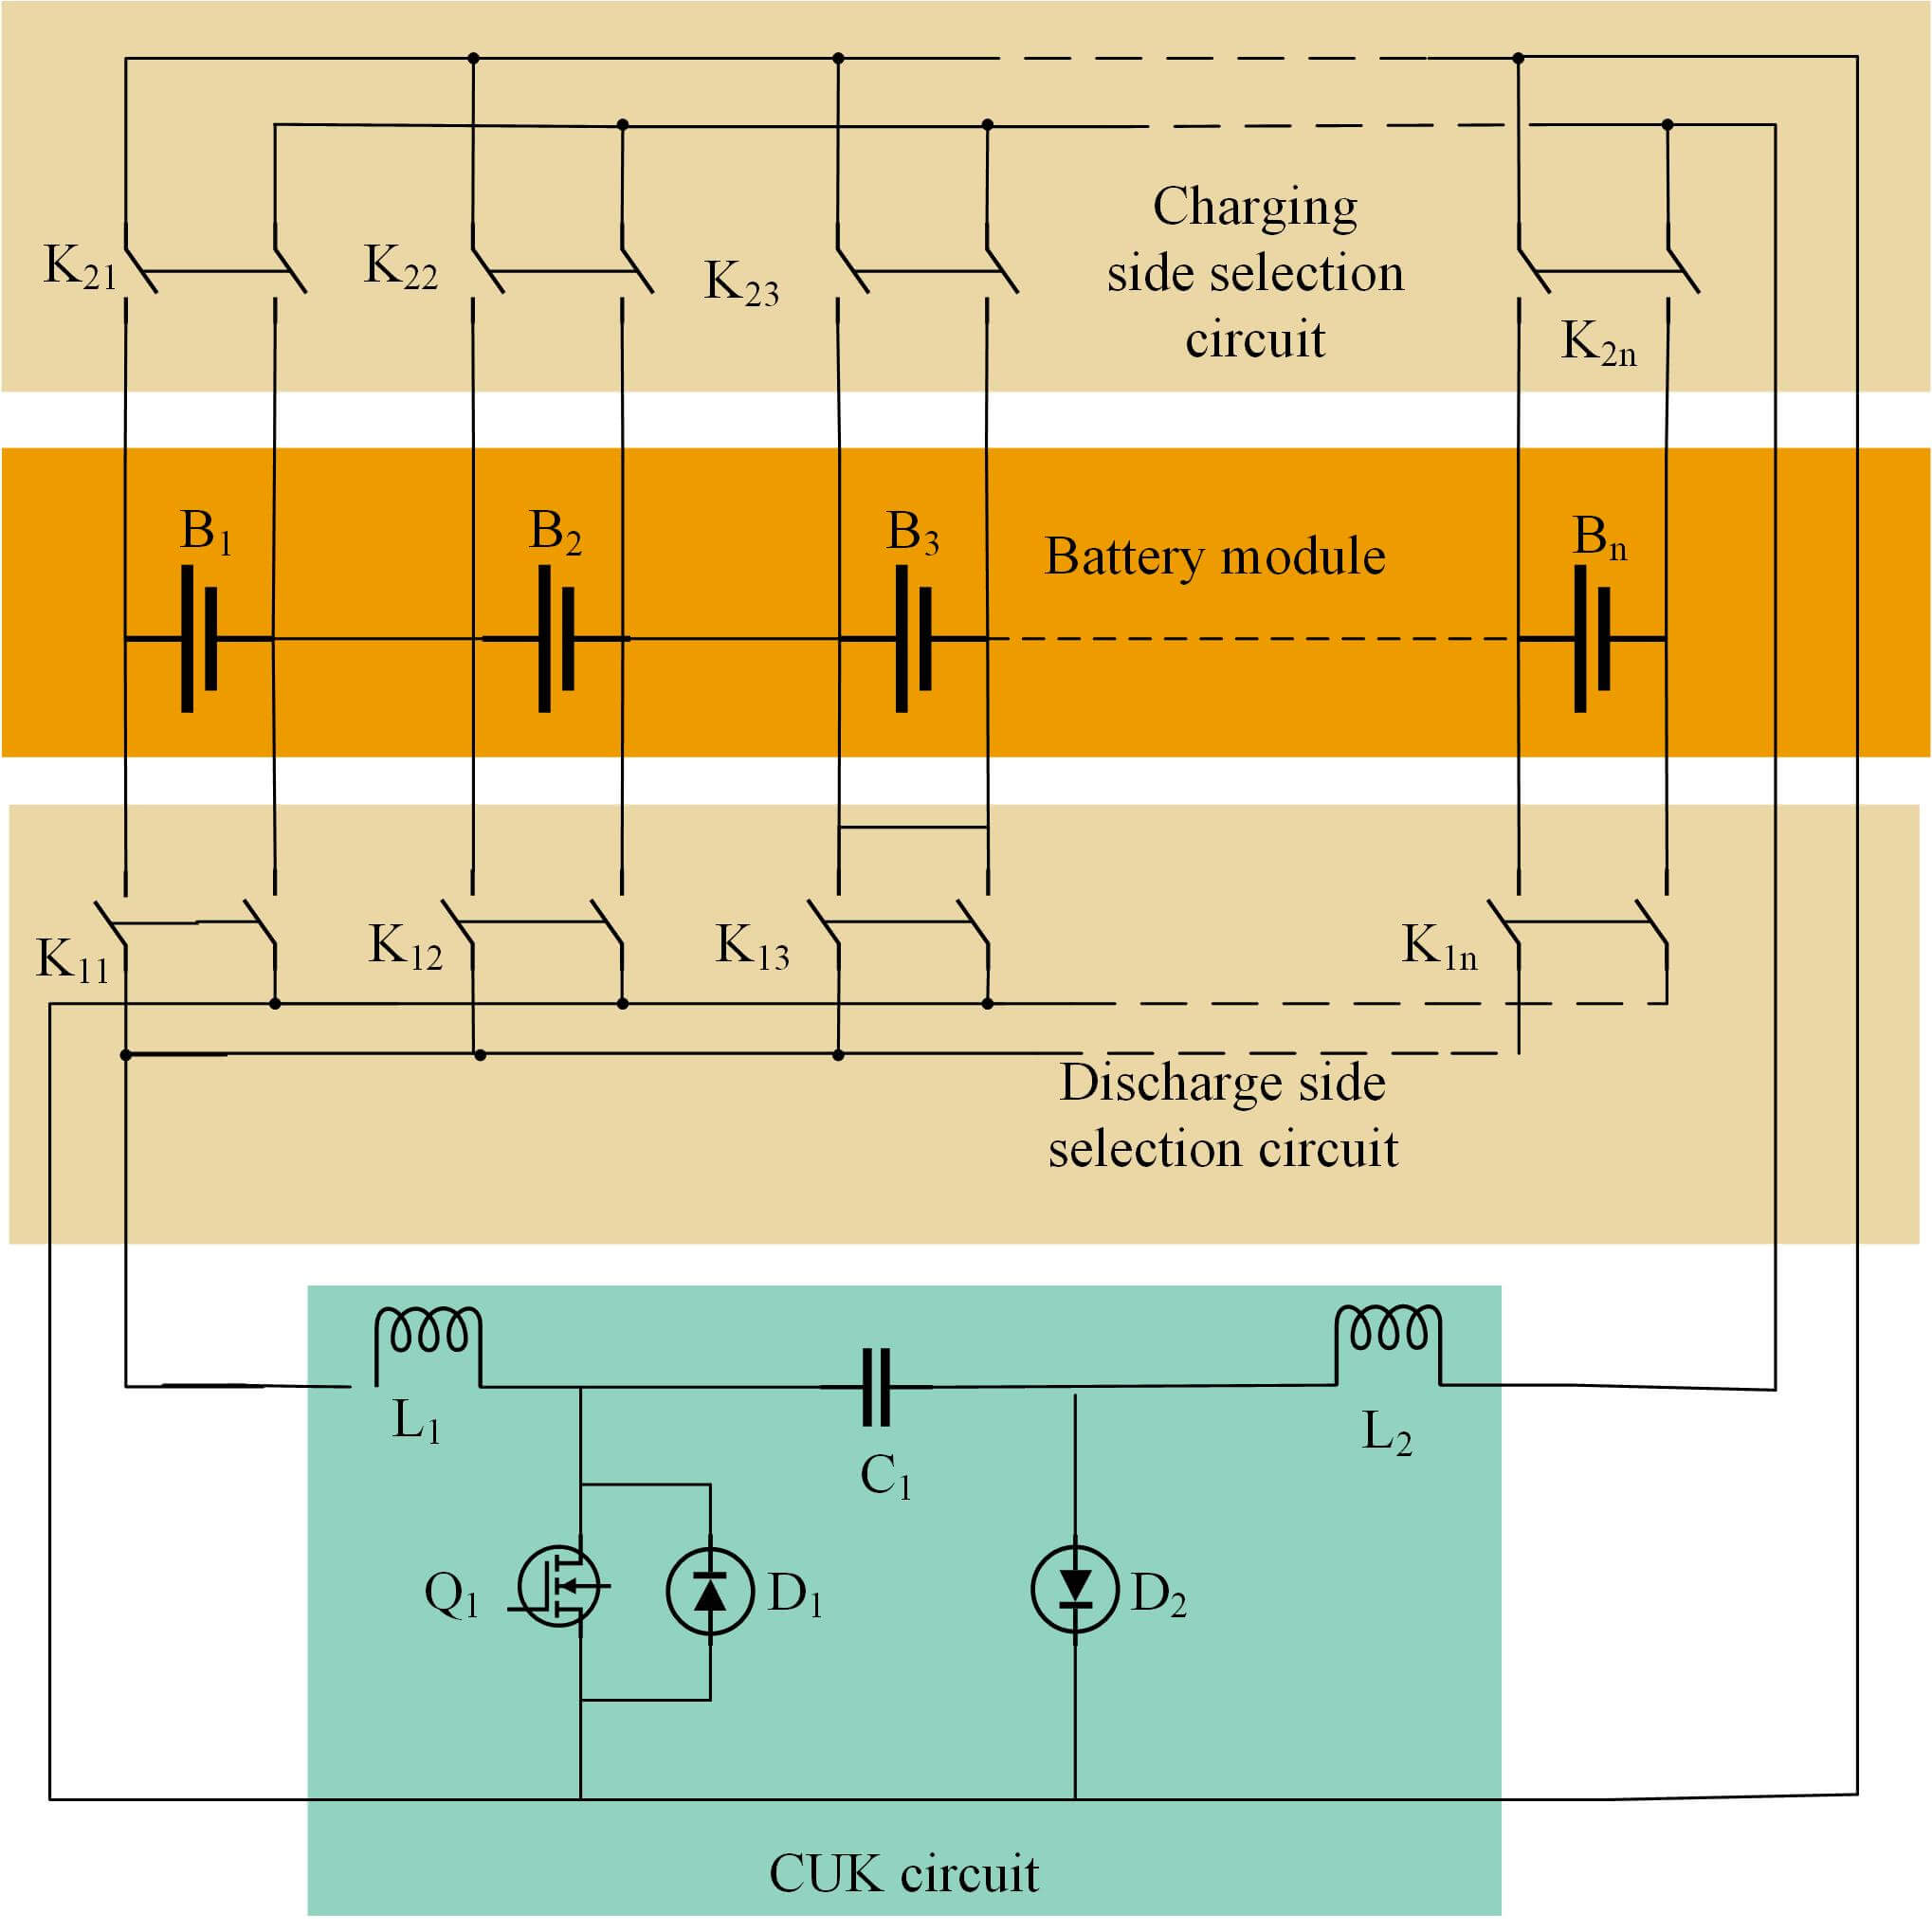 A New Equalization Method for Lithium-Ion Battery Packs Based on CUK Converter